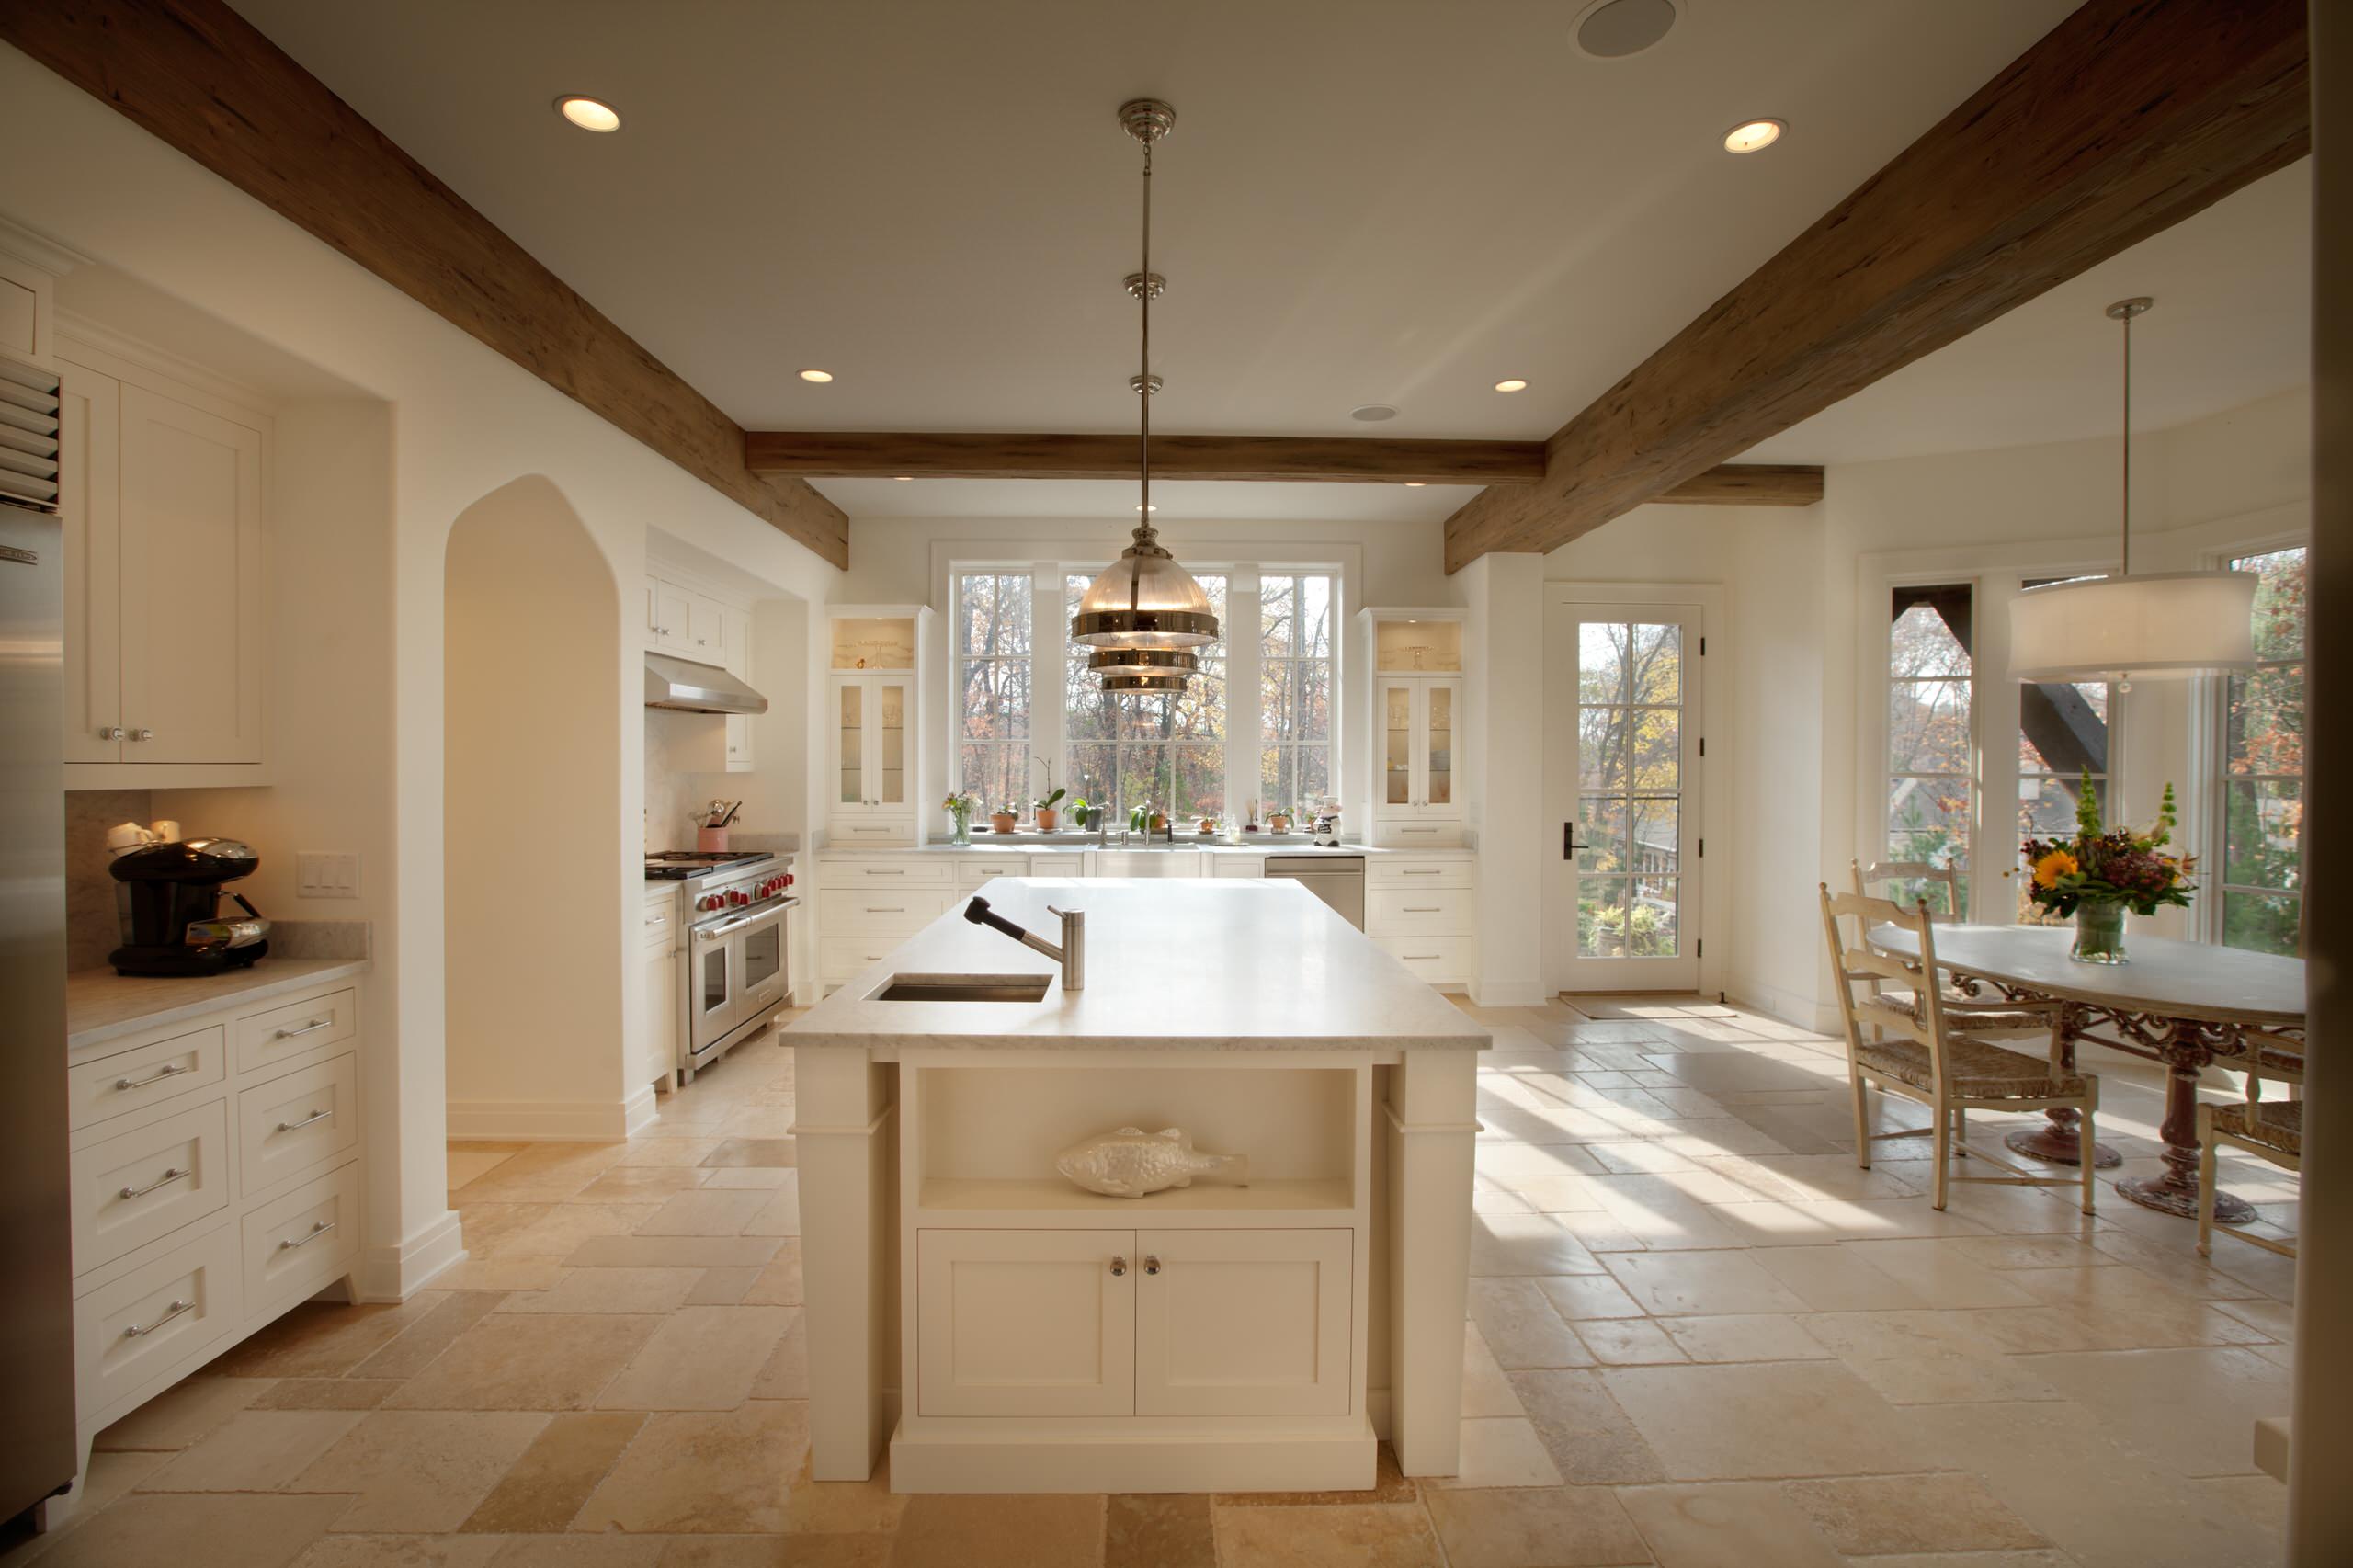 English Country in Northome - Traditional - Kitchen - Minneapolis - by  Murphy & Co. Design | Houzz